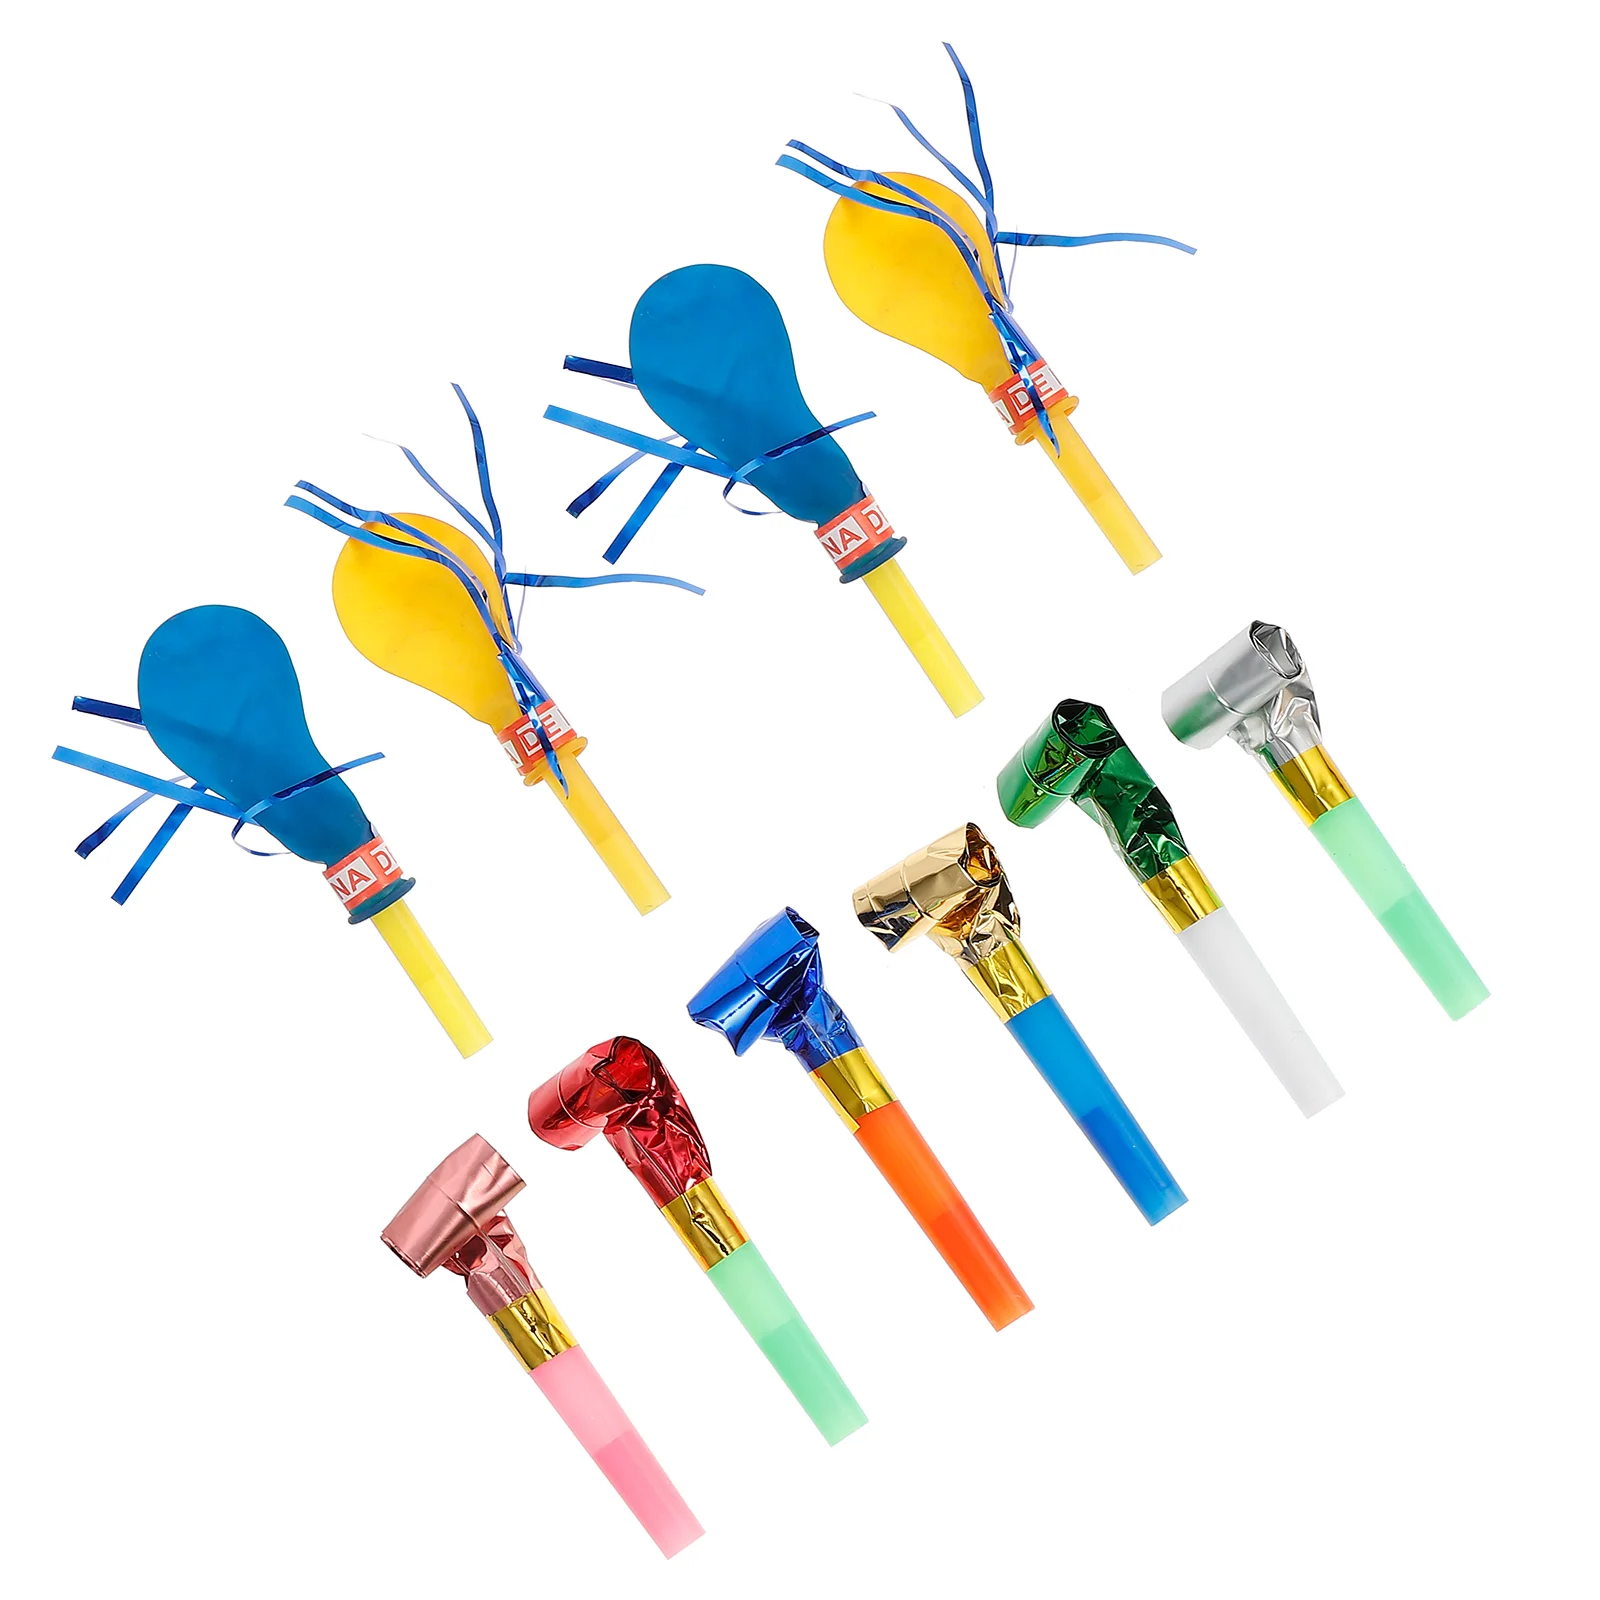 

Party Whistles Whistle Blowouts Toys Horns Noisemakers Birthday Cheering Favors Blow